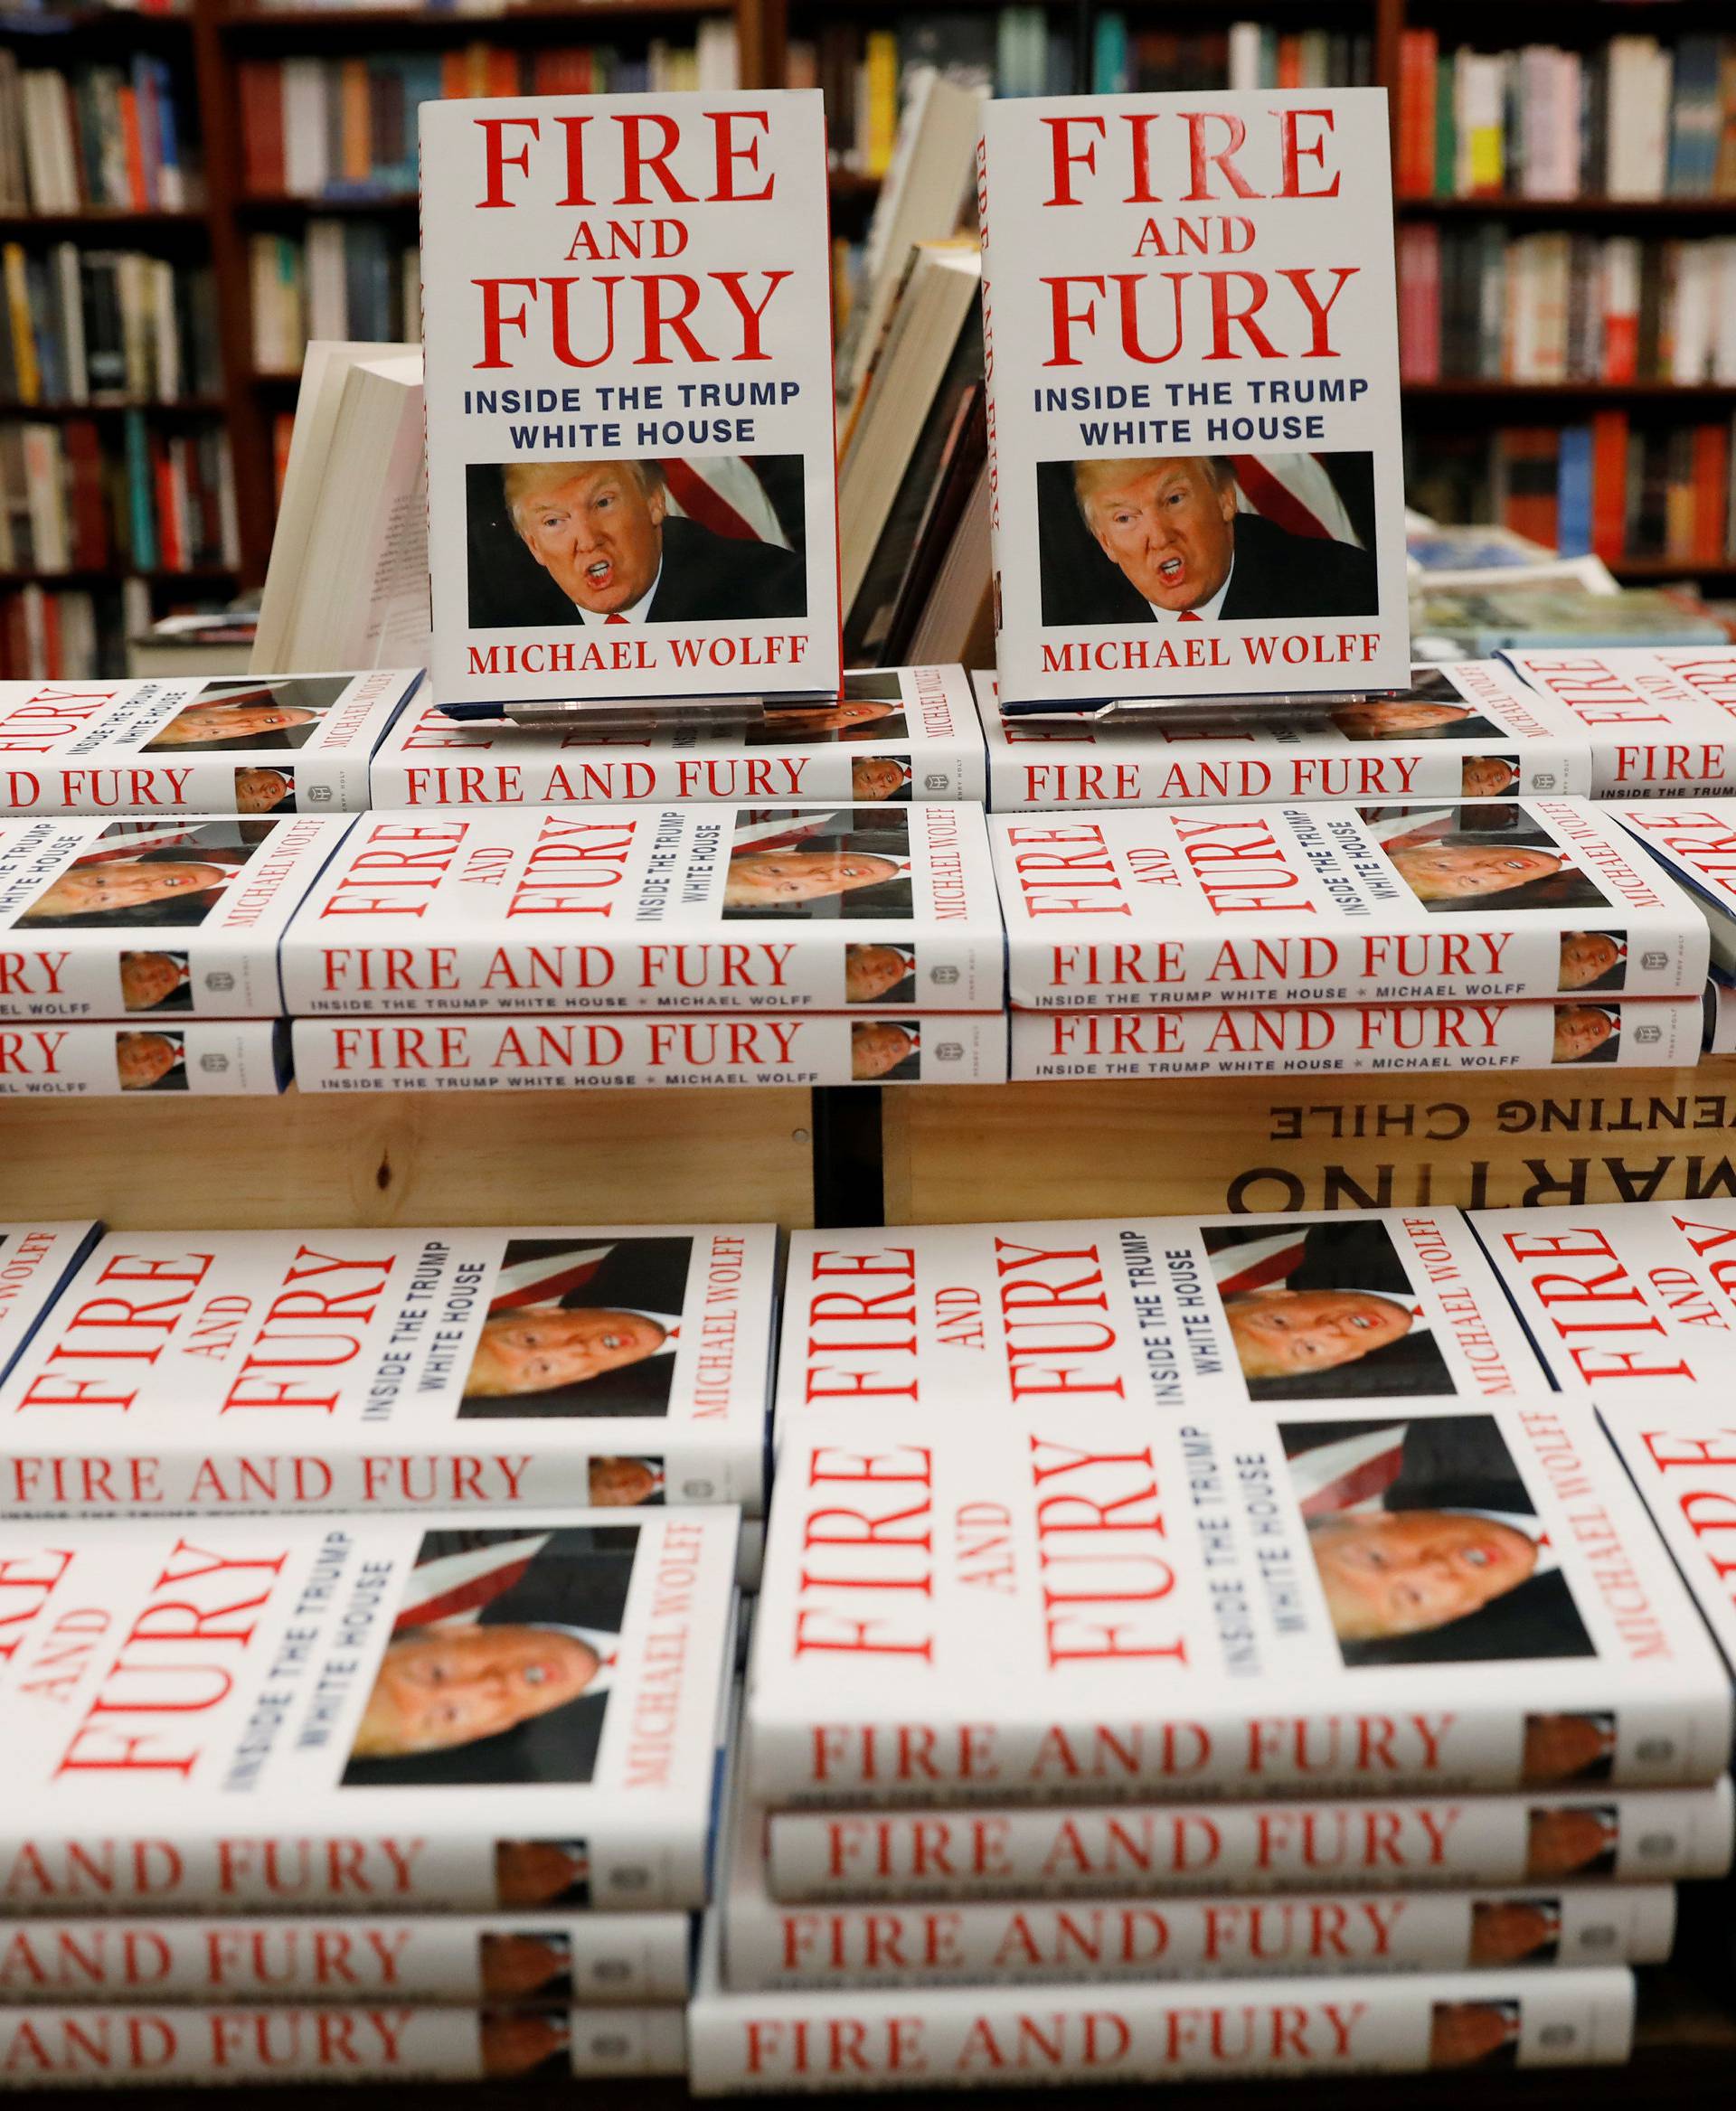 Copies of the book "Fire and Fury: Inside the Trump White House" by author Michael Wolff are seen at the Book Culture book store in New York